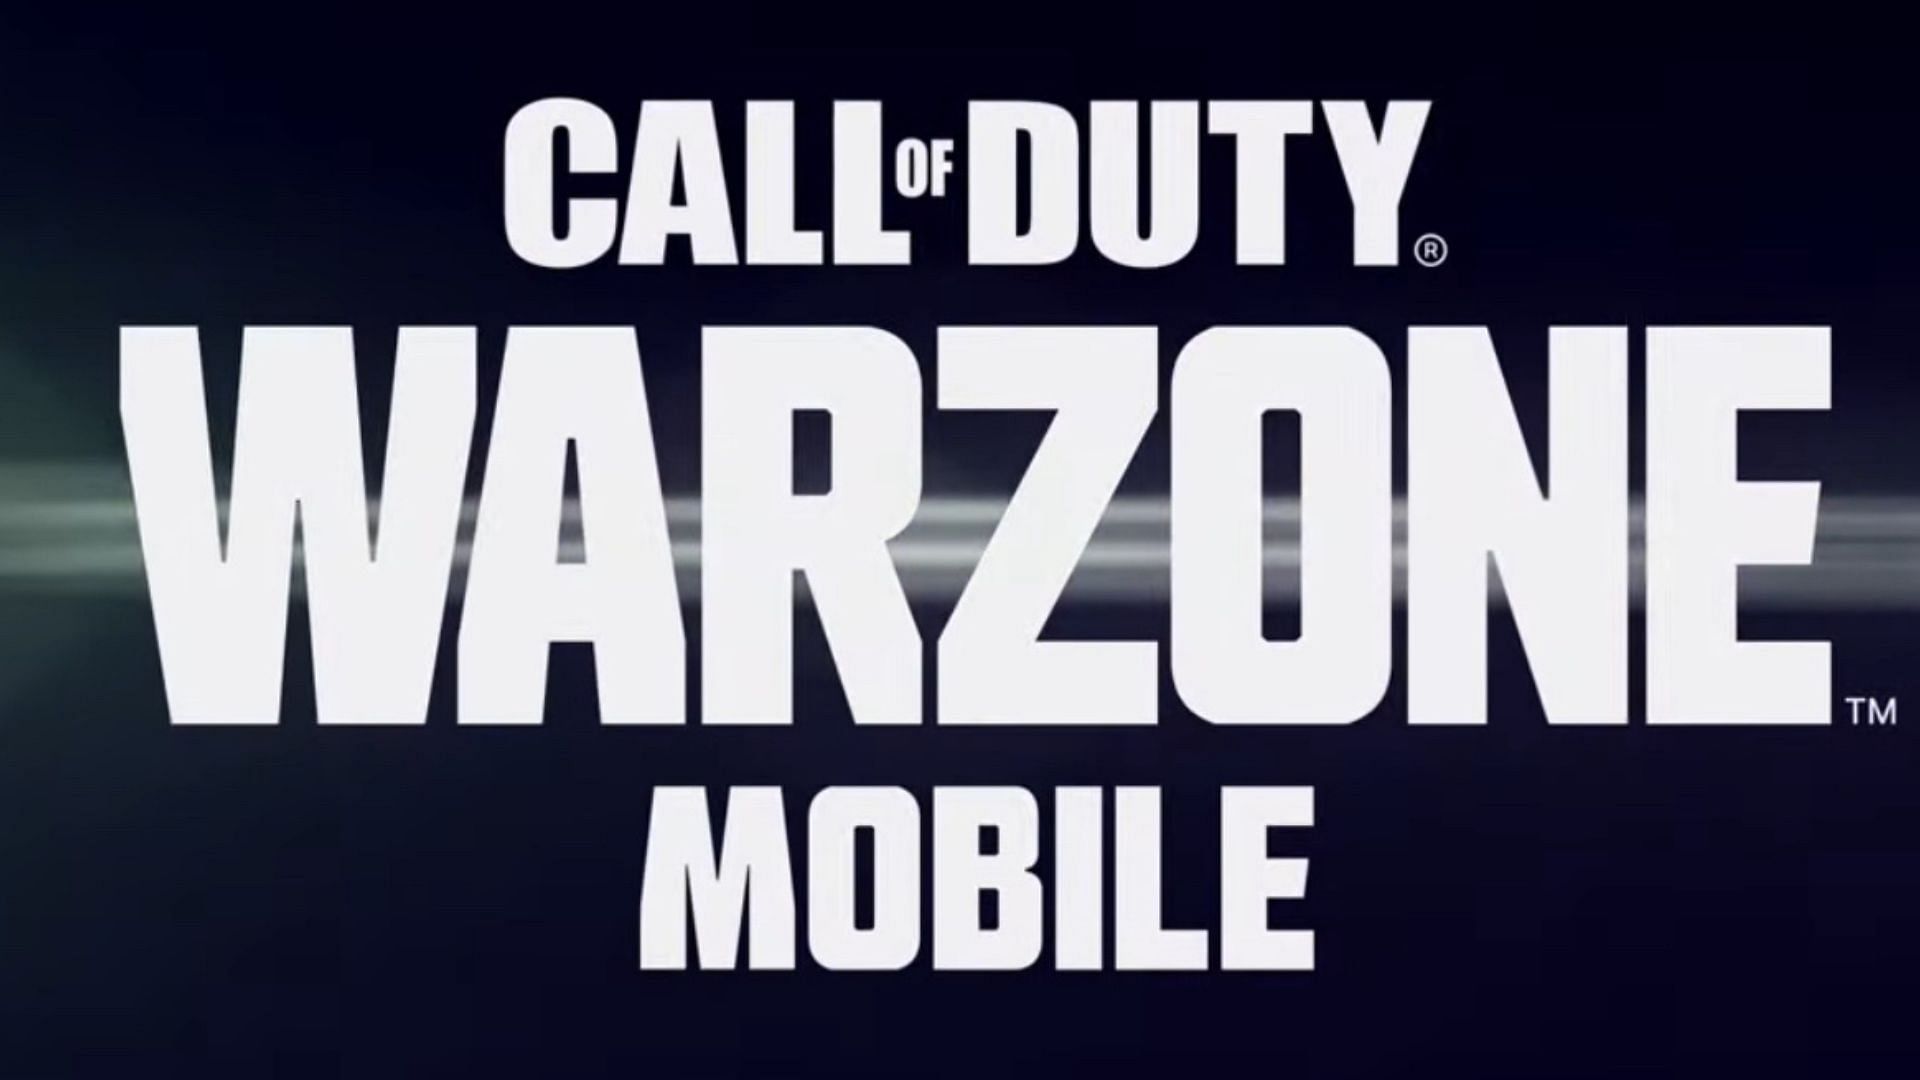 COD Warzone Mobile supports 120 player lobbies (Image via Activision)